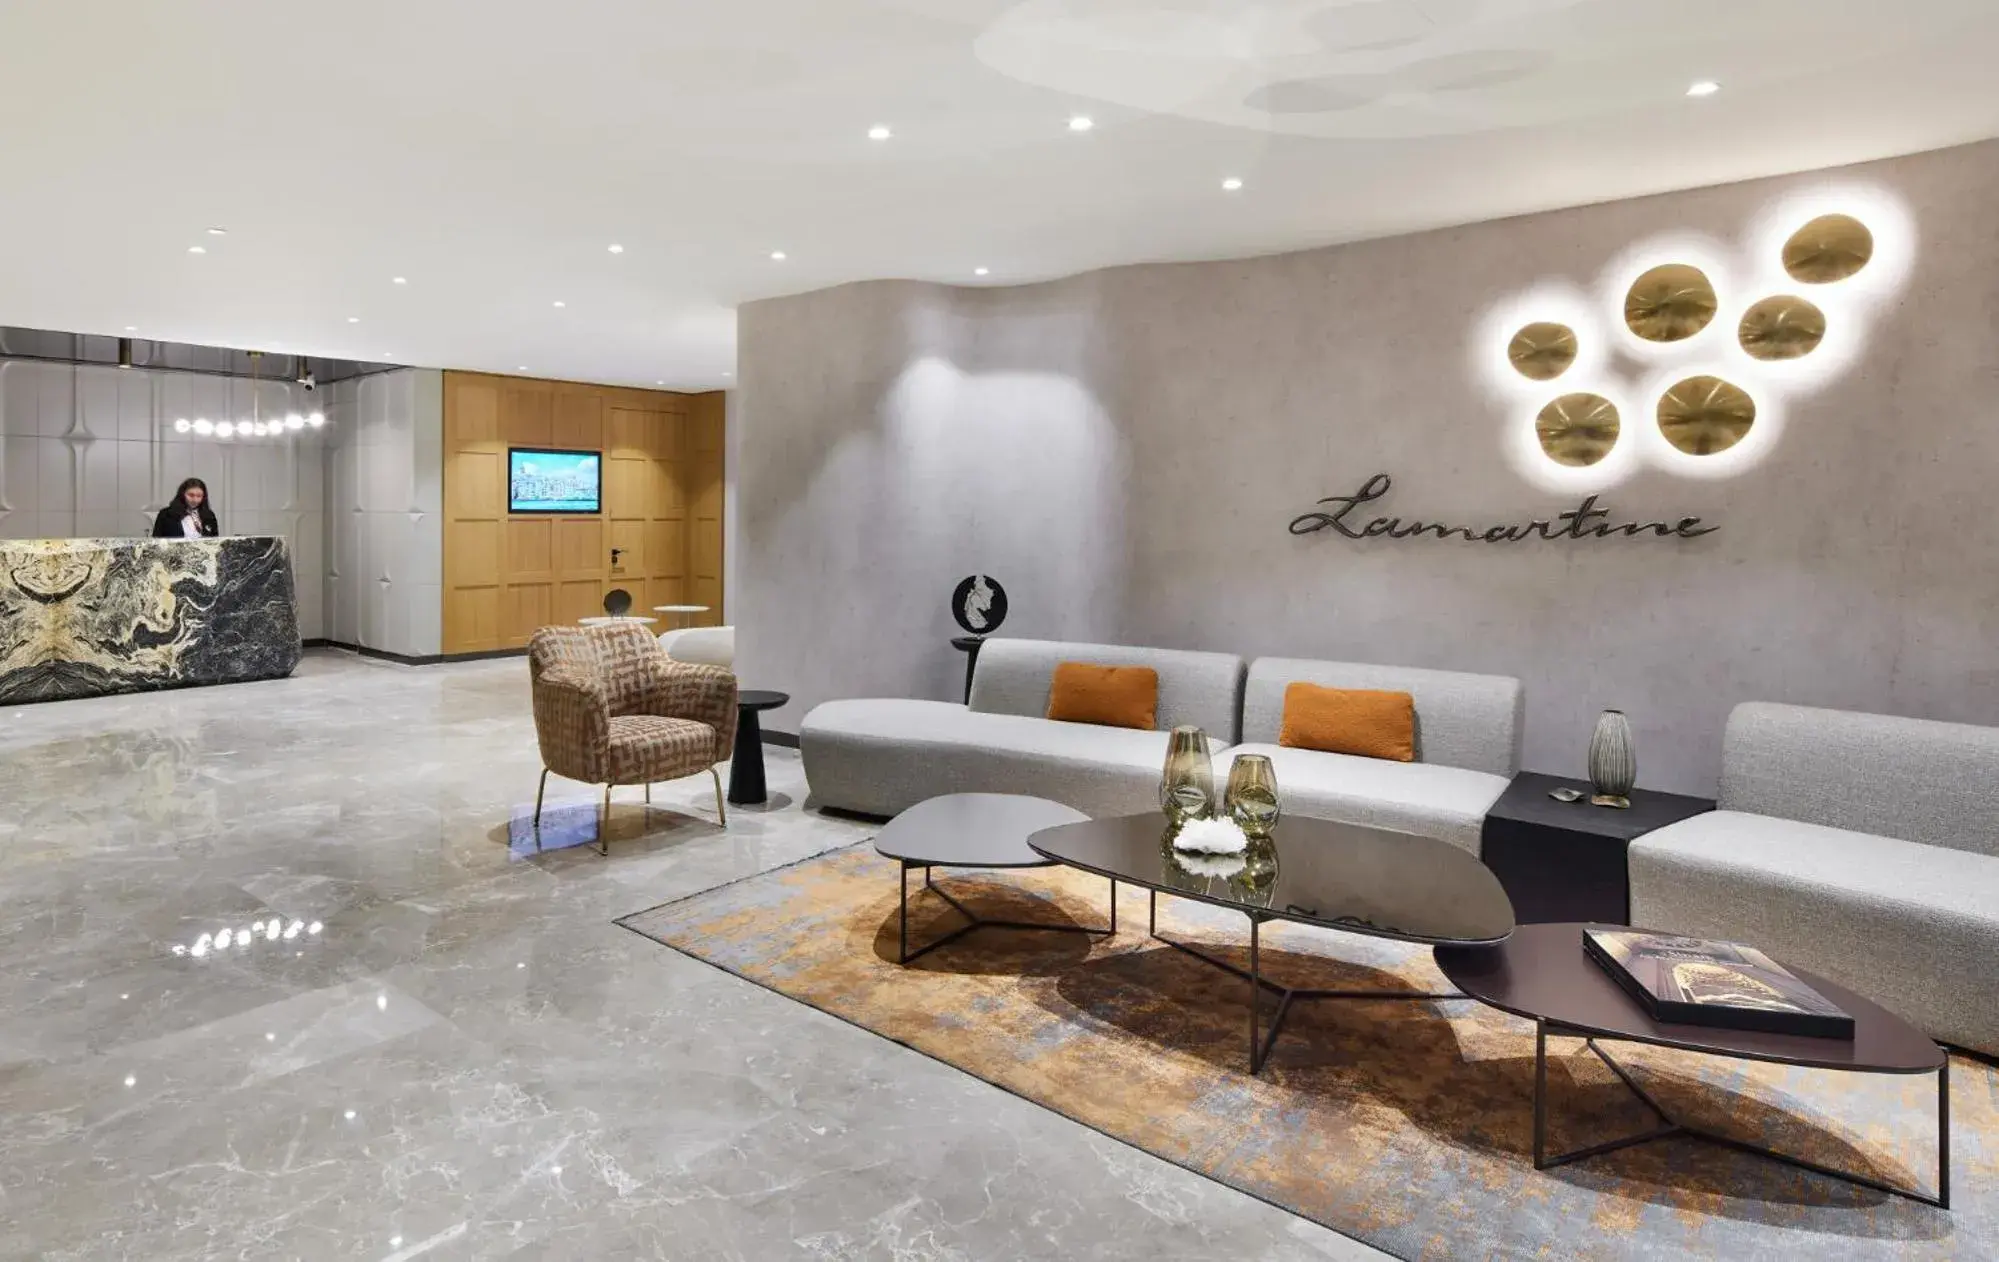 Property building, Lobby/Reception in Lamartine Hotel